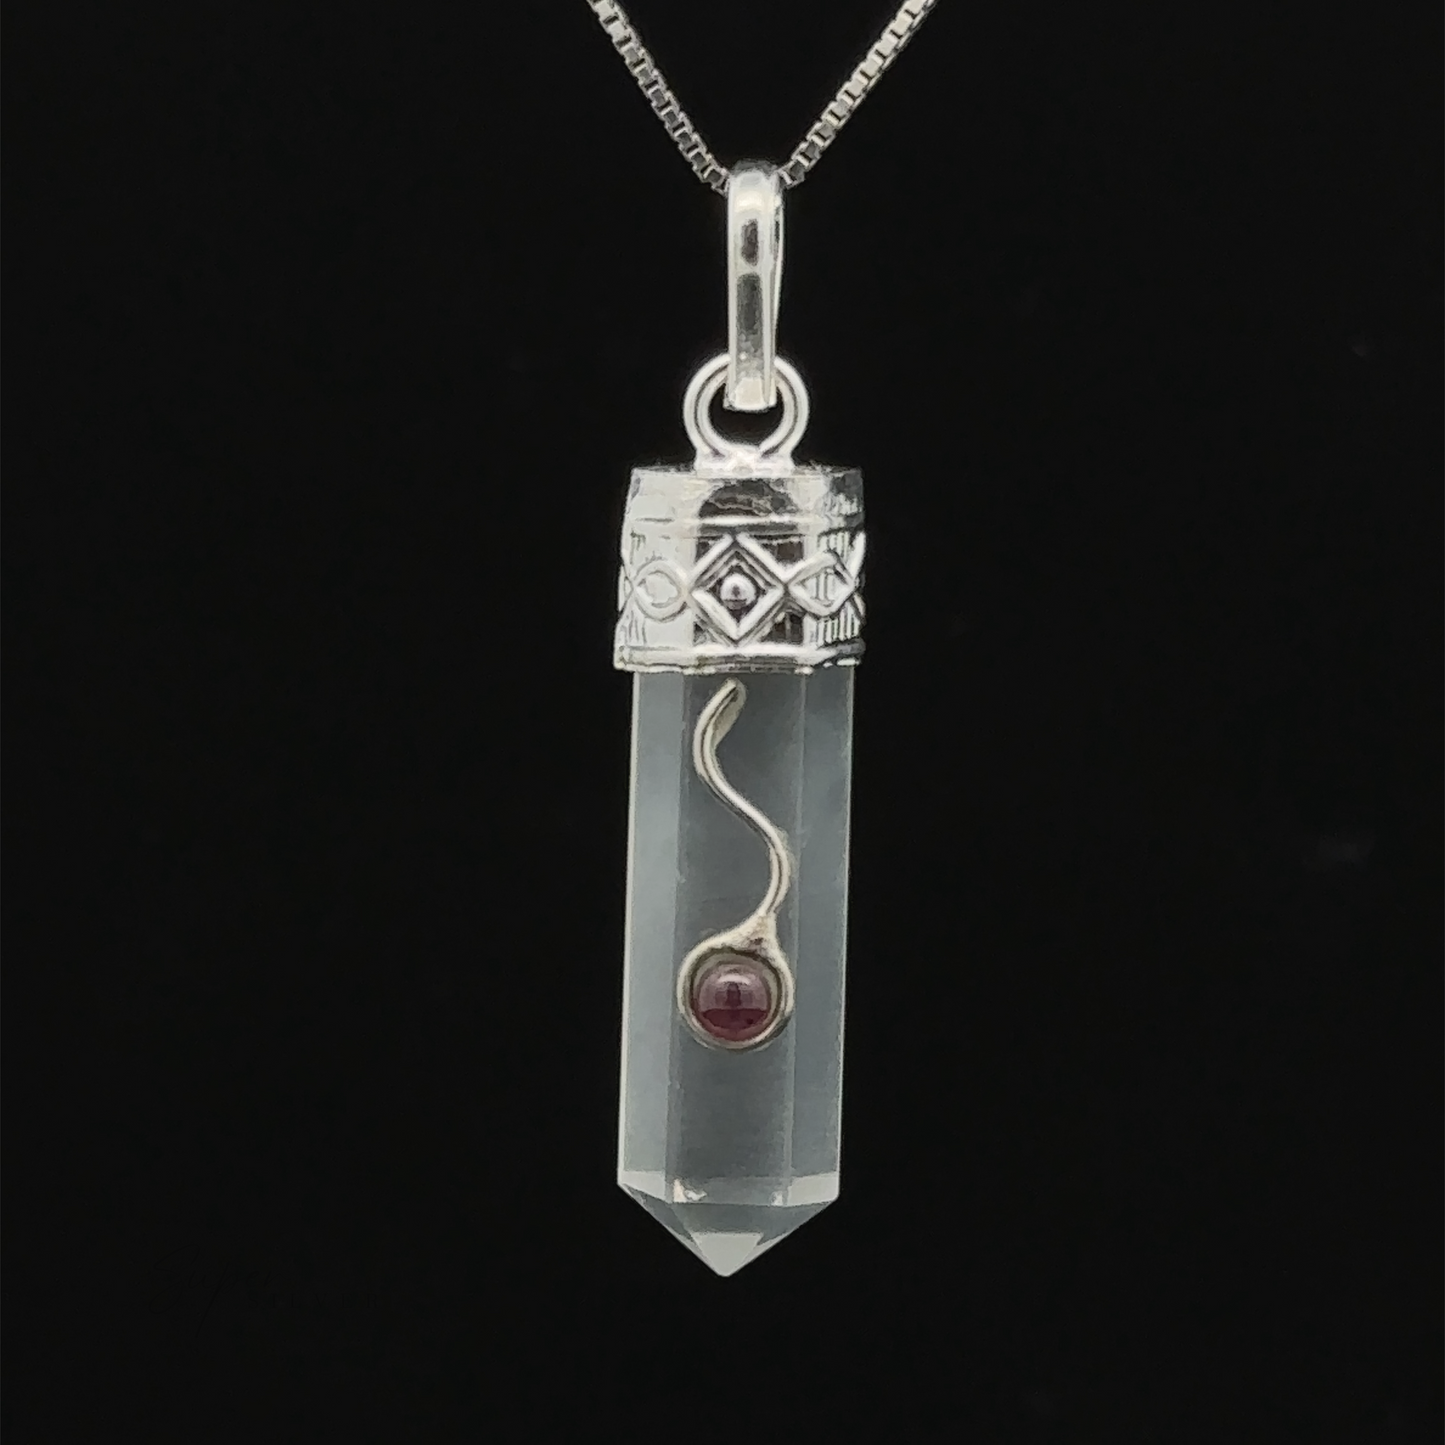 
                  
                    A clear Crystal Pendant with Decorative Bail, encased in an ornate silver cap, hangs on a delicate silver chain against a black background, showcasing exquisite garnet detail.
                  
                